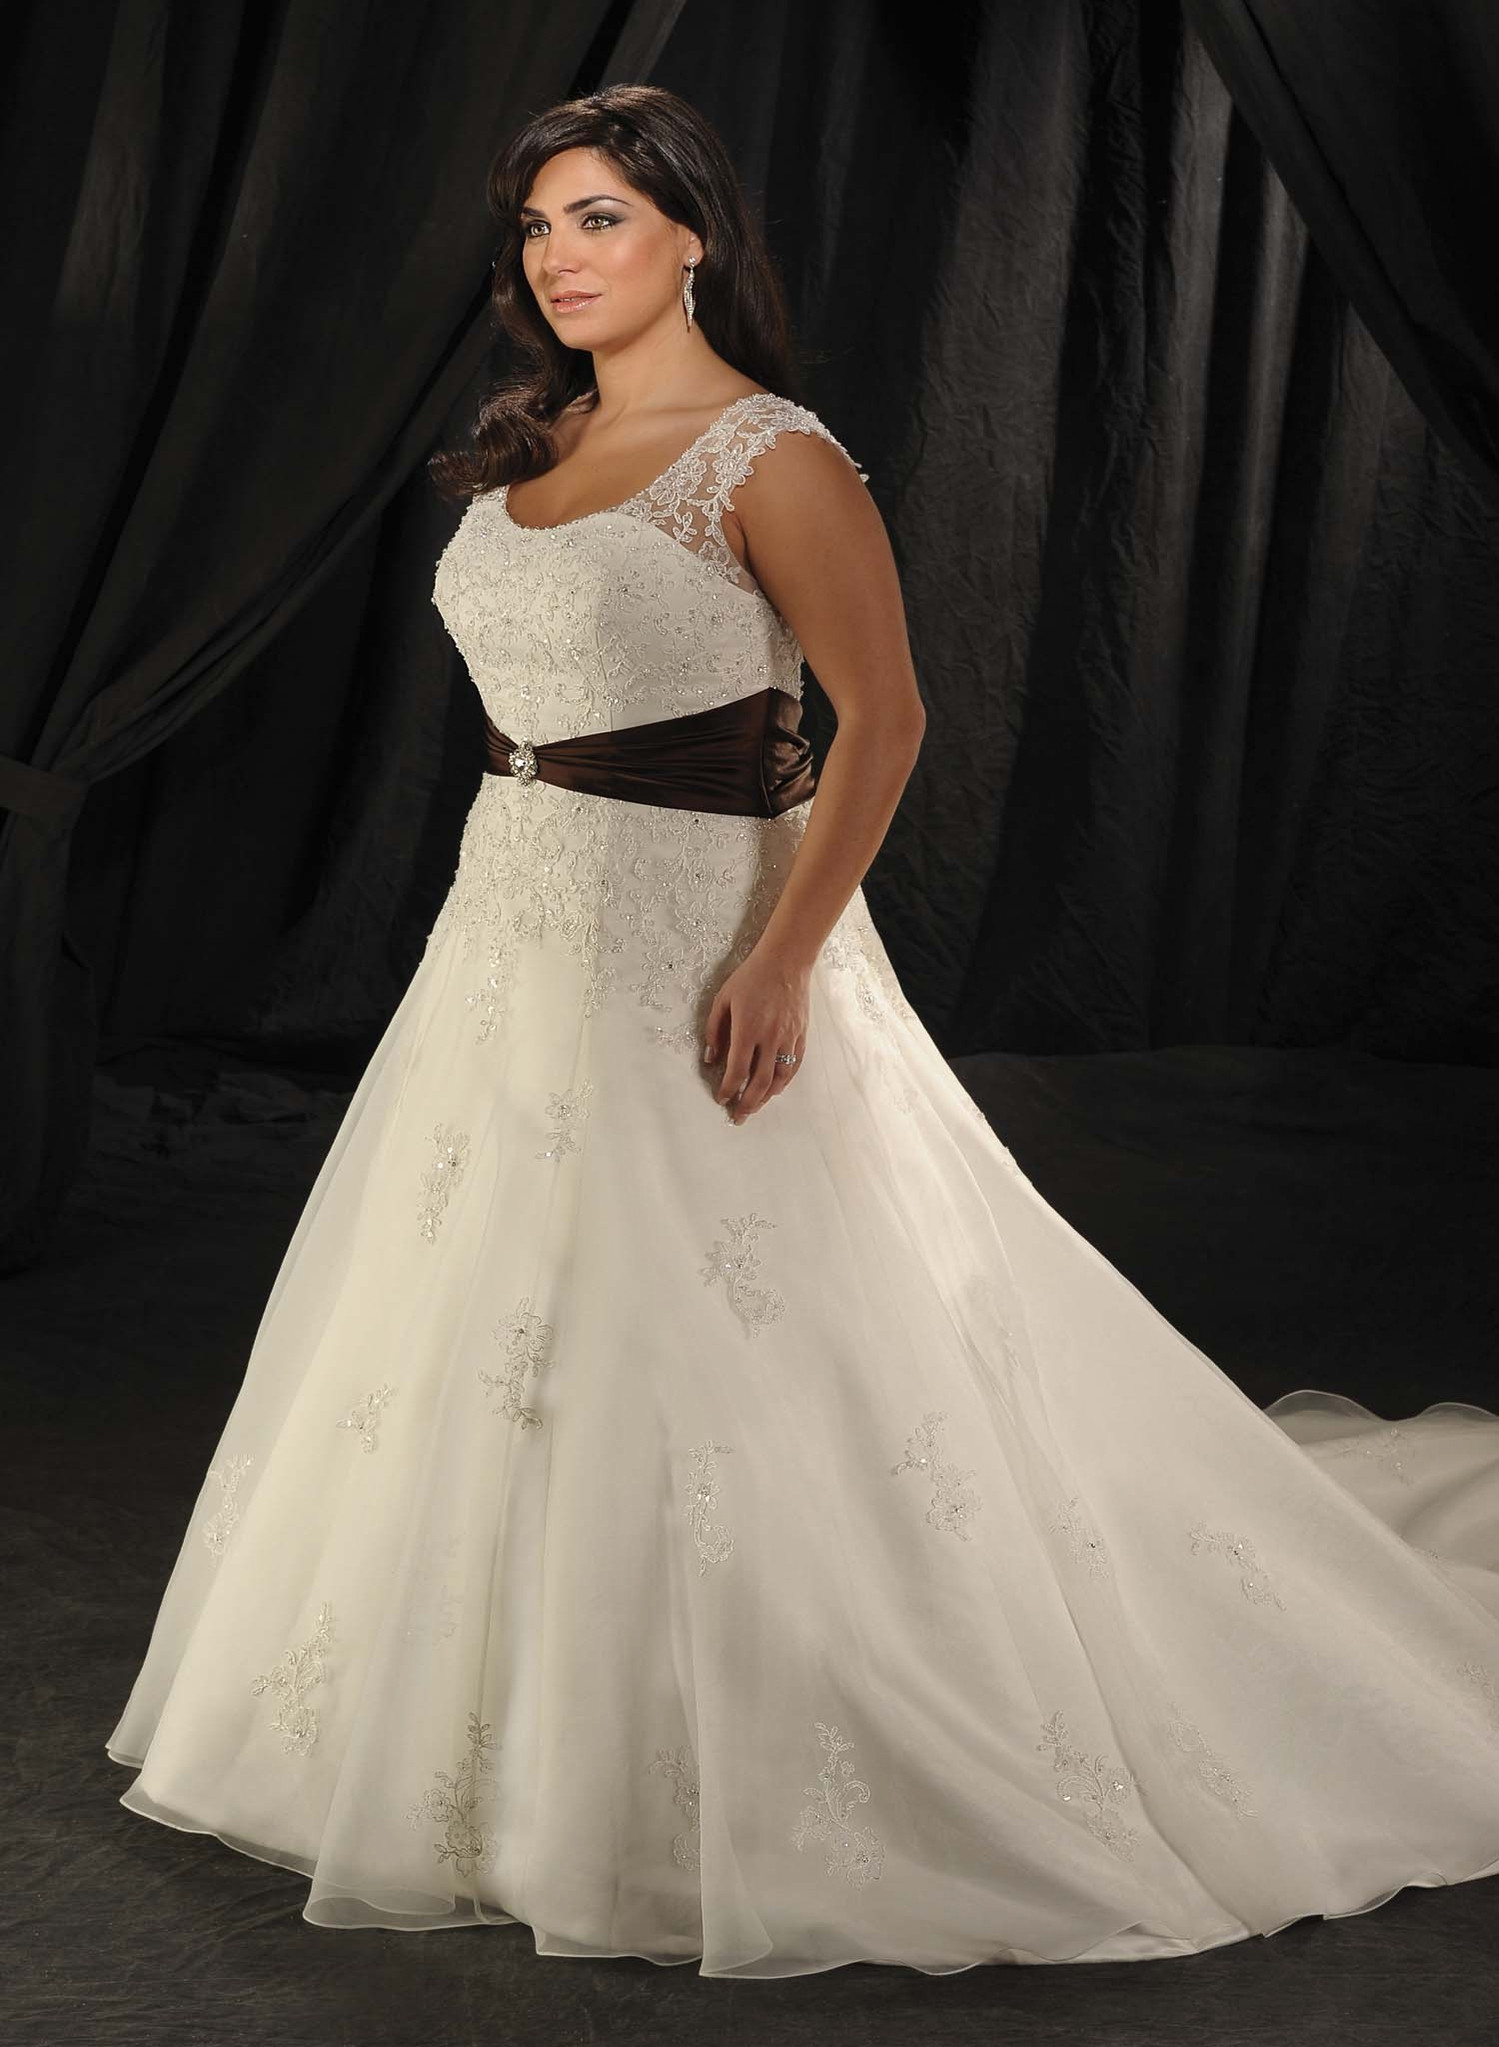 Plus Size Dresses For Wedding
 The Wedding Dress Guide for Full figured Brides